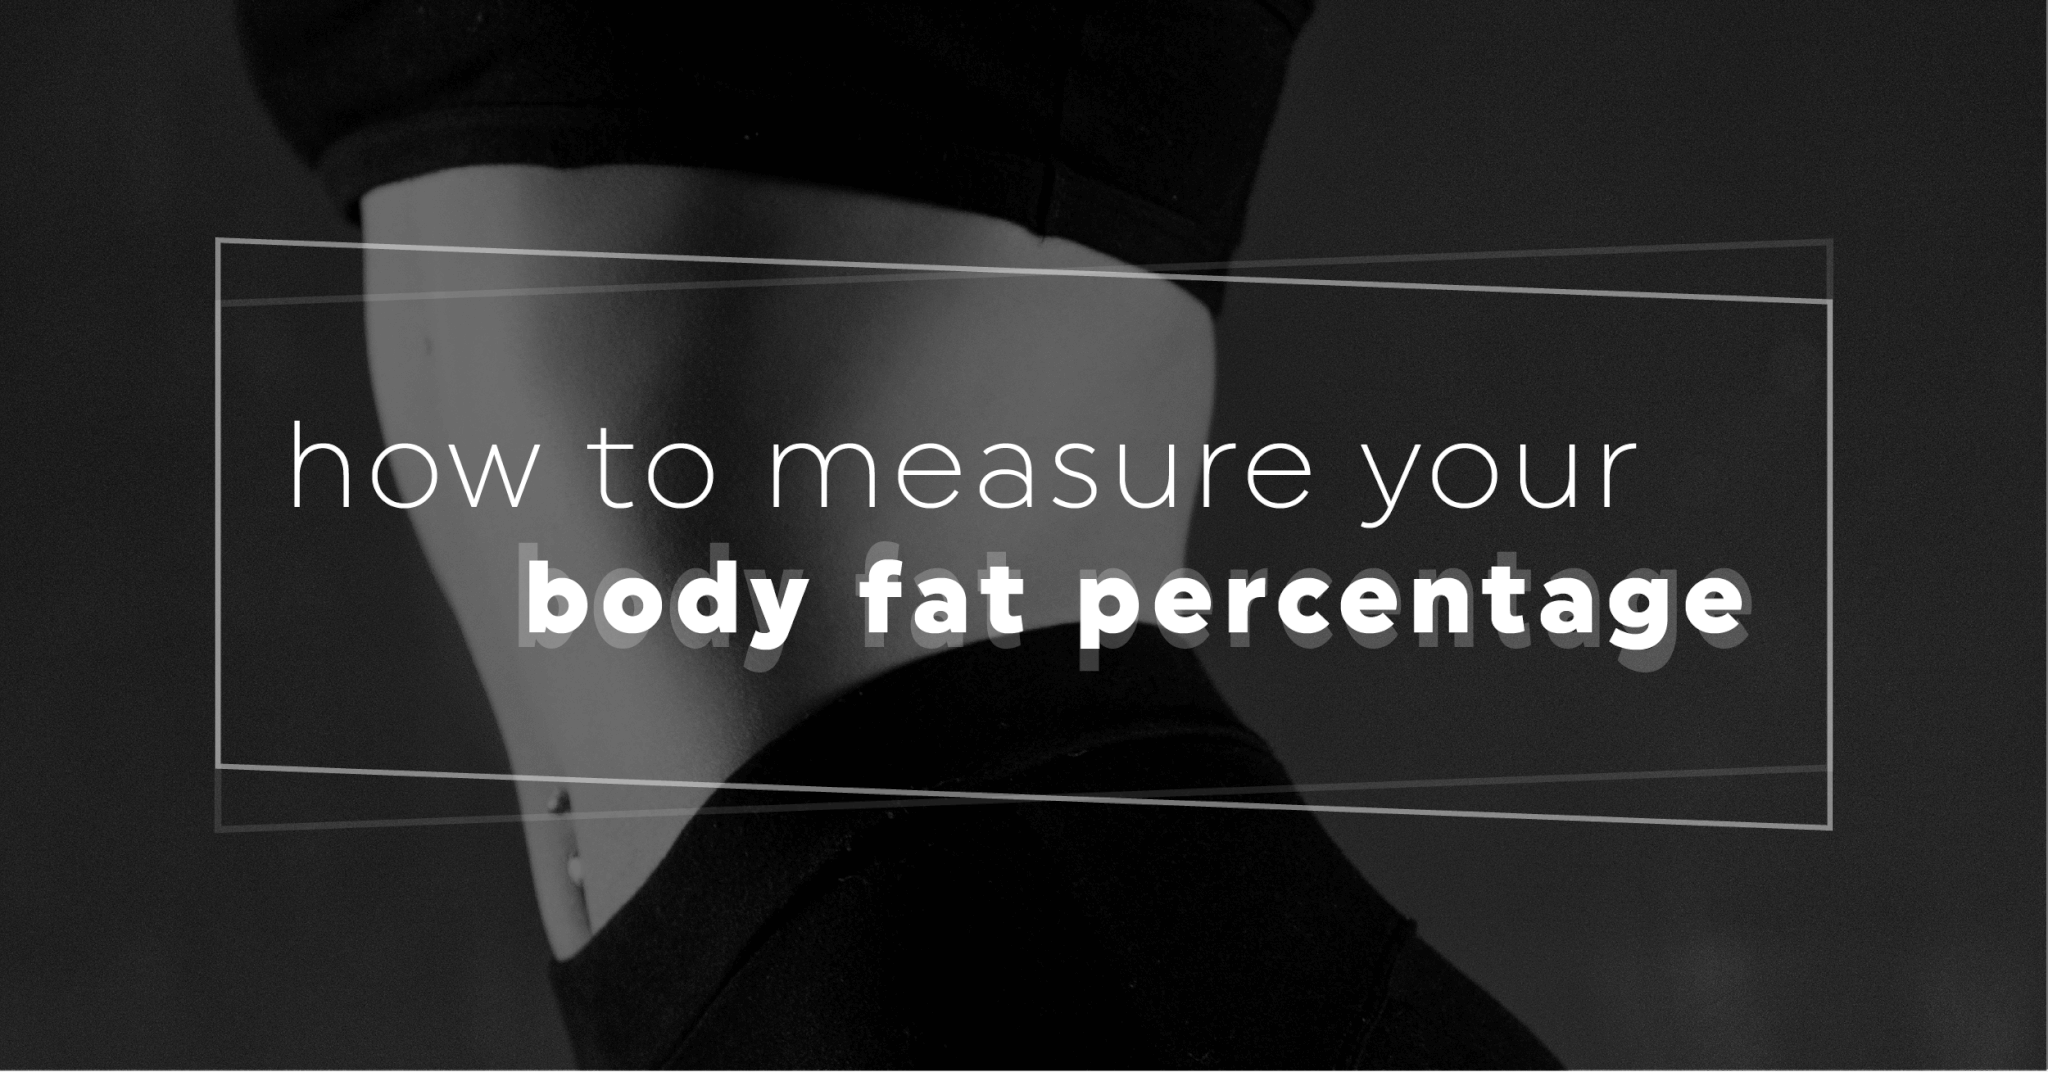 Accurately Measure Your Body Fat Levels With This Handheld Bmi